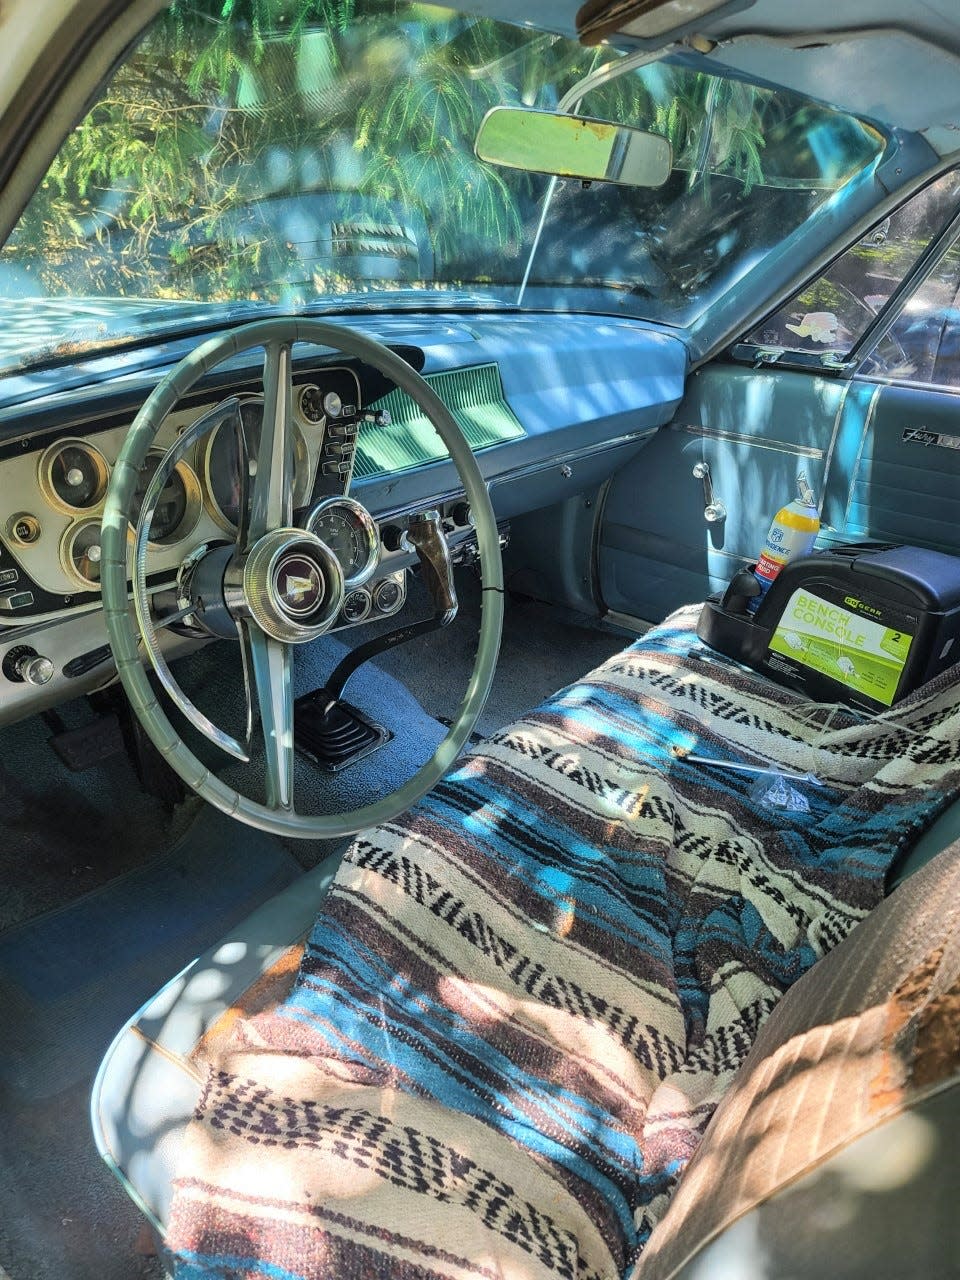 The interior of the 1963 Plymouth Fury.